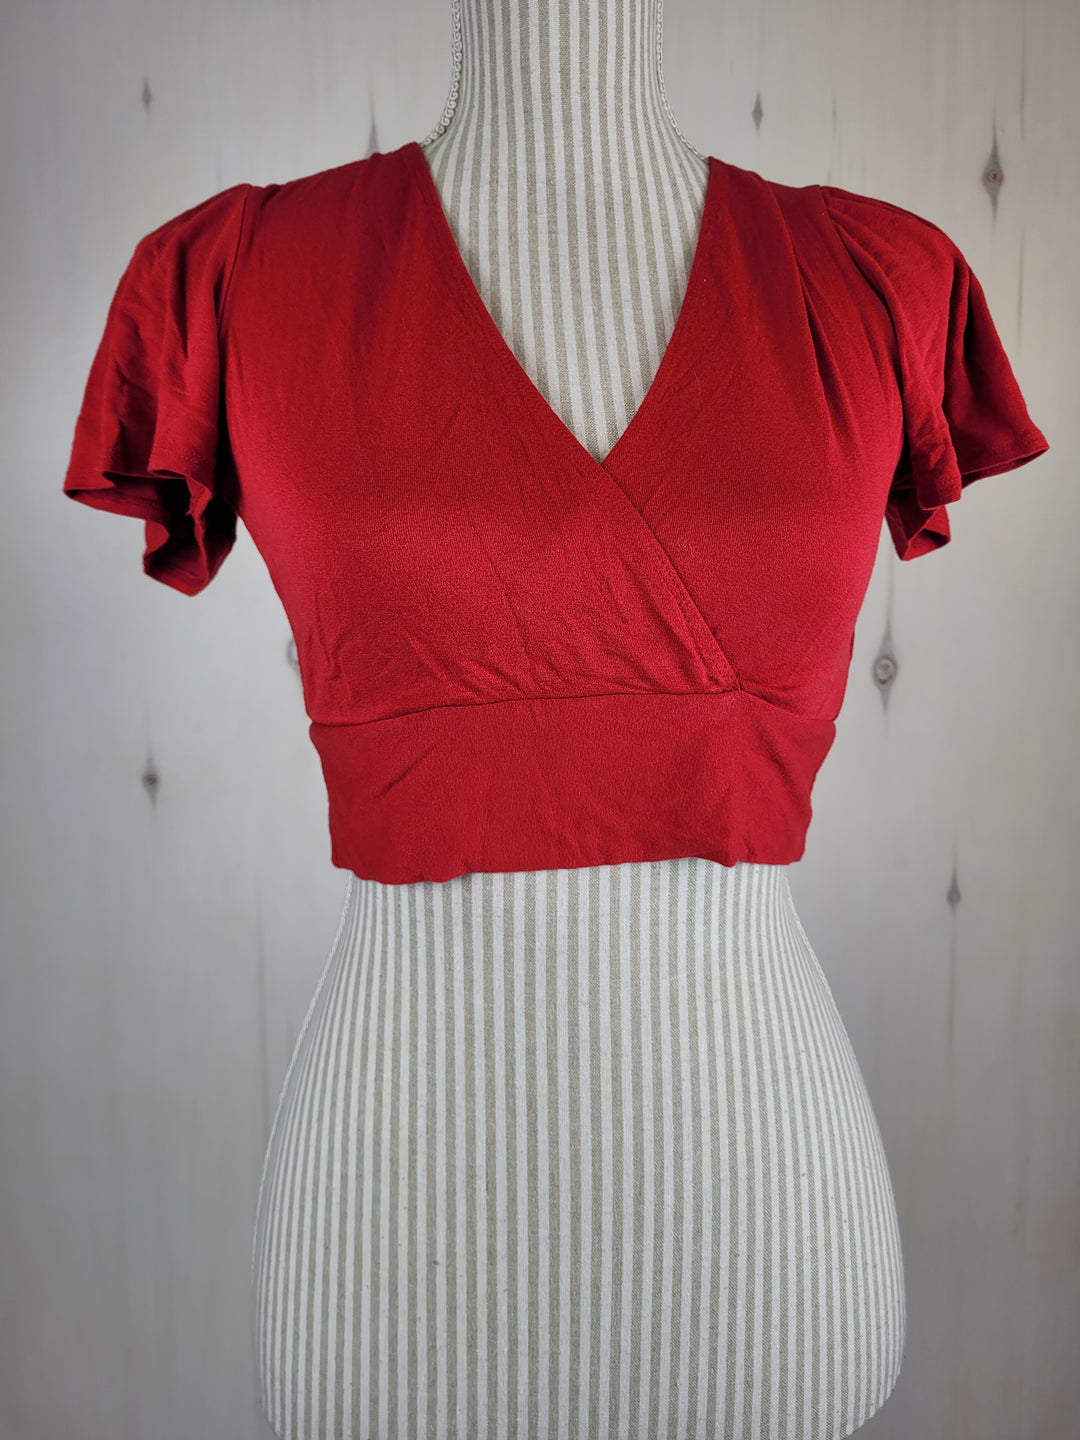 GARAGE RED CROPPED TOP LADIES SMALL EUC